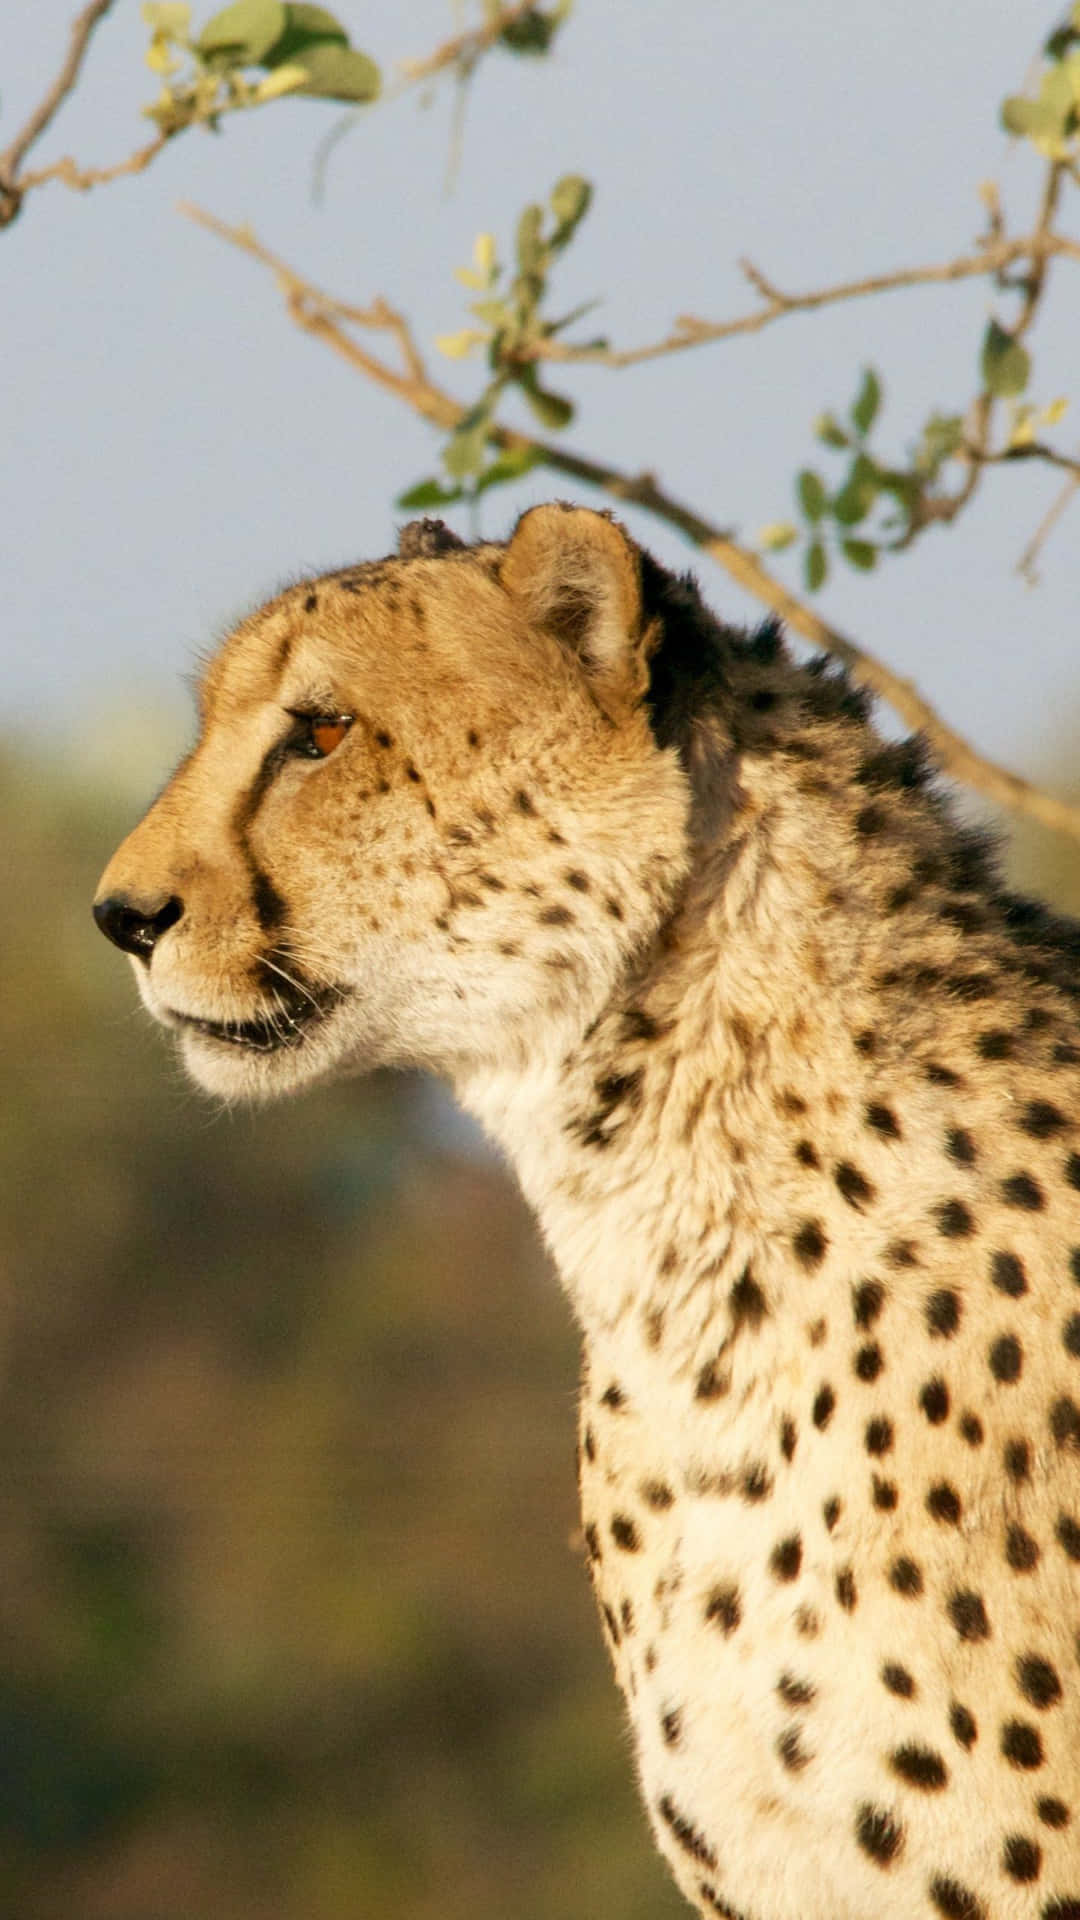 Caption: Majestic Cheetah in a Sprint on iPhone Wallpaper Wallpaper